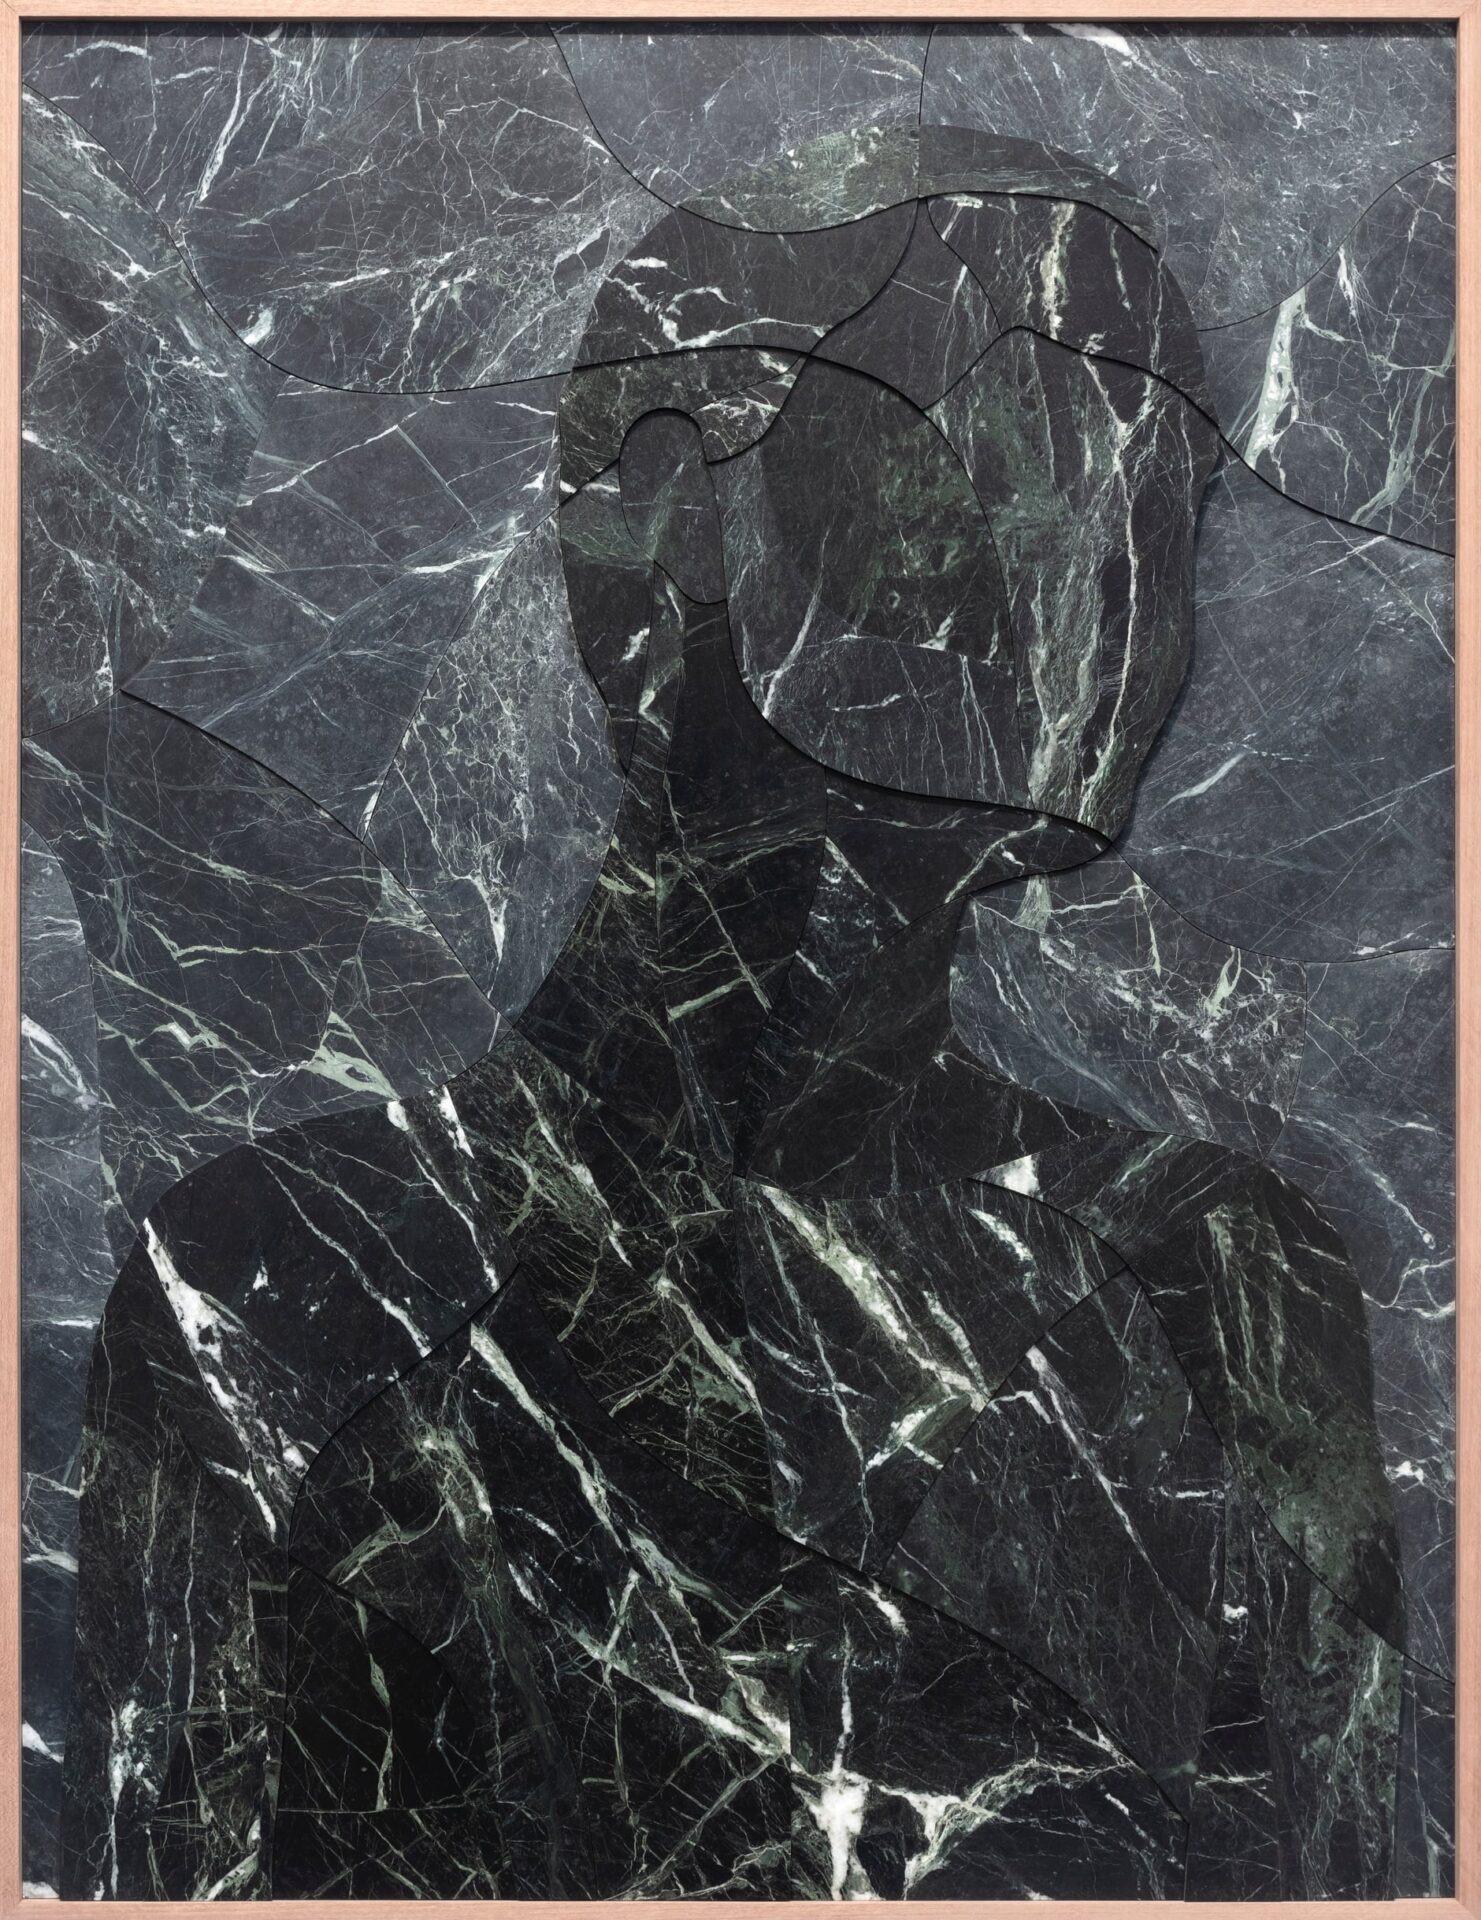 a portrait of a faceless figure made of black marble